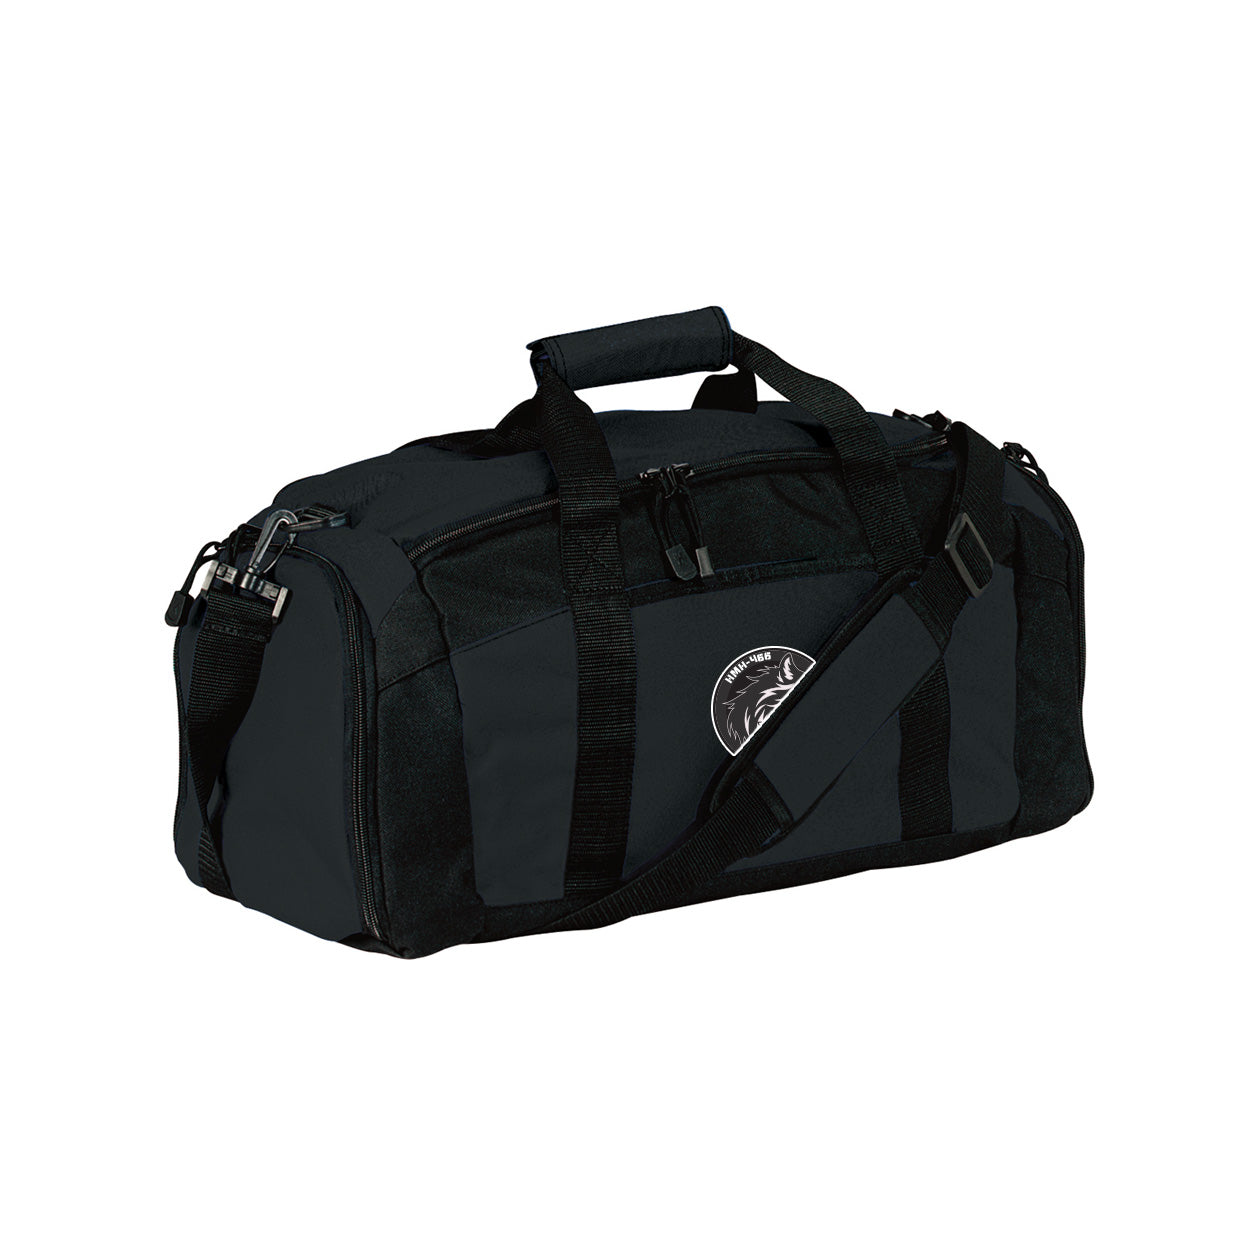 HMH-466 WOLF EMBROIDERED PLAYER DUFFLE BAG